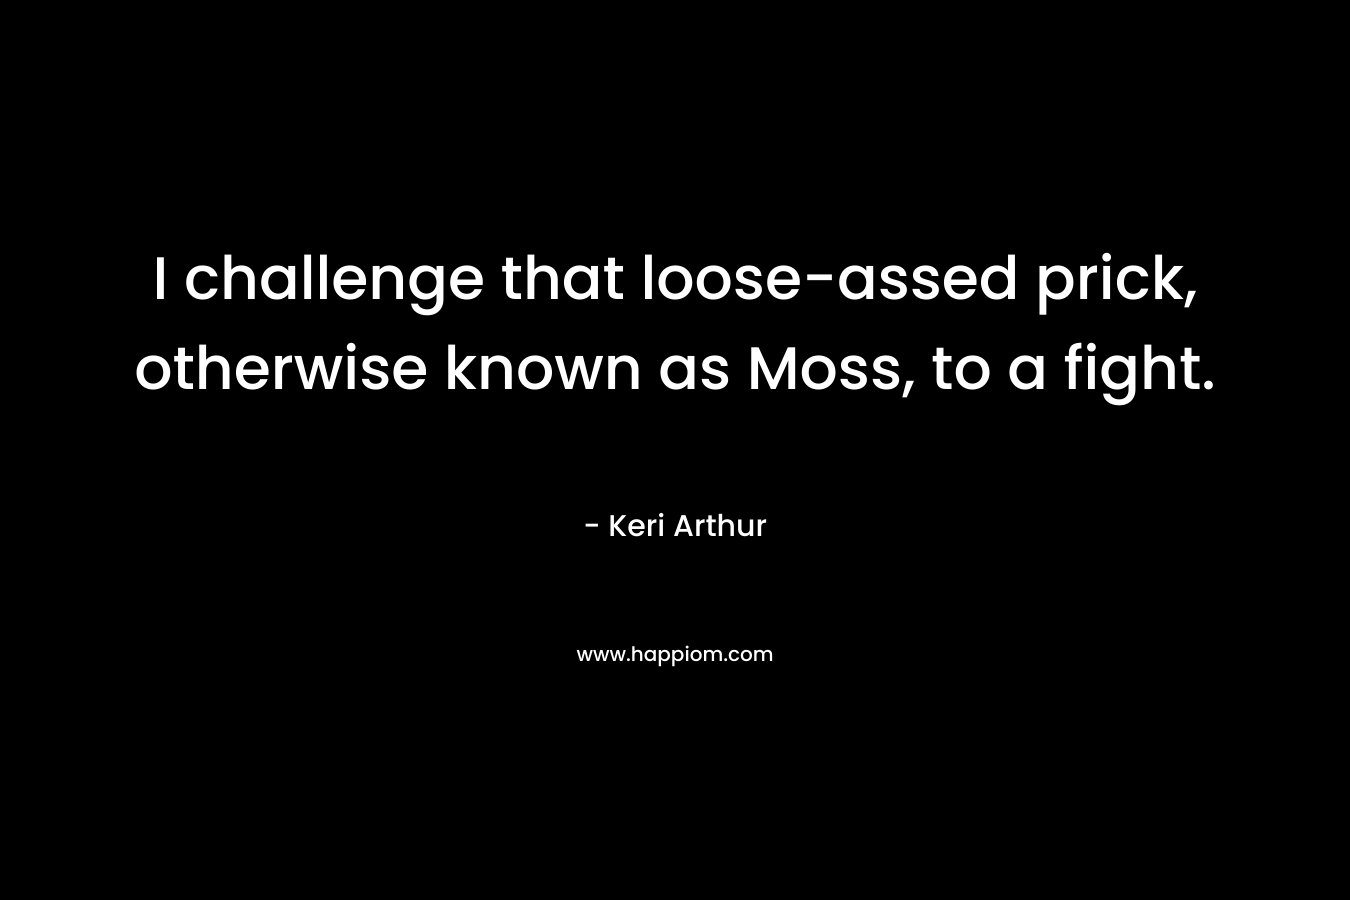 I challenge that loose-assed prick, otherwise known as Moss, to a fight. – Keri Arthur